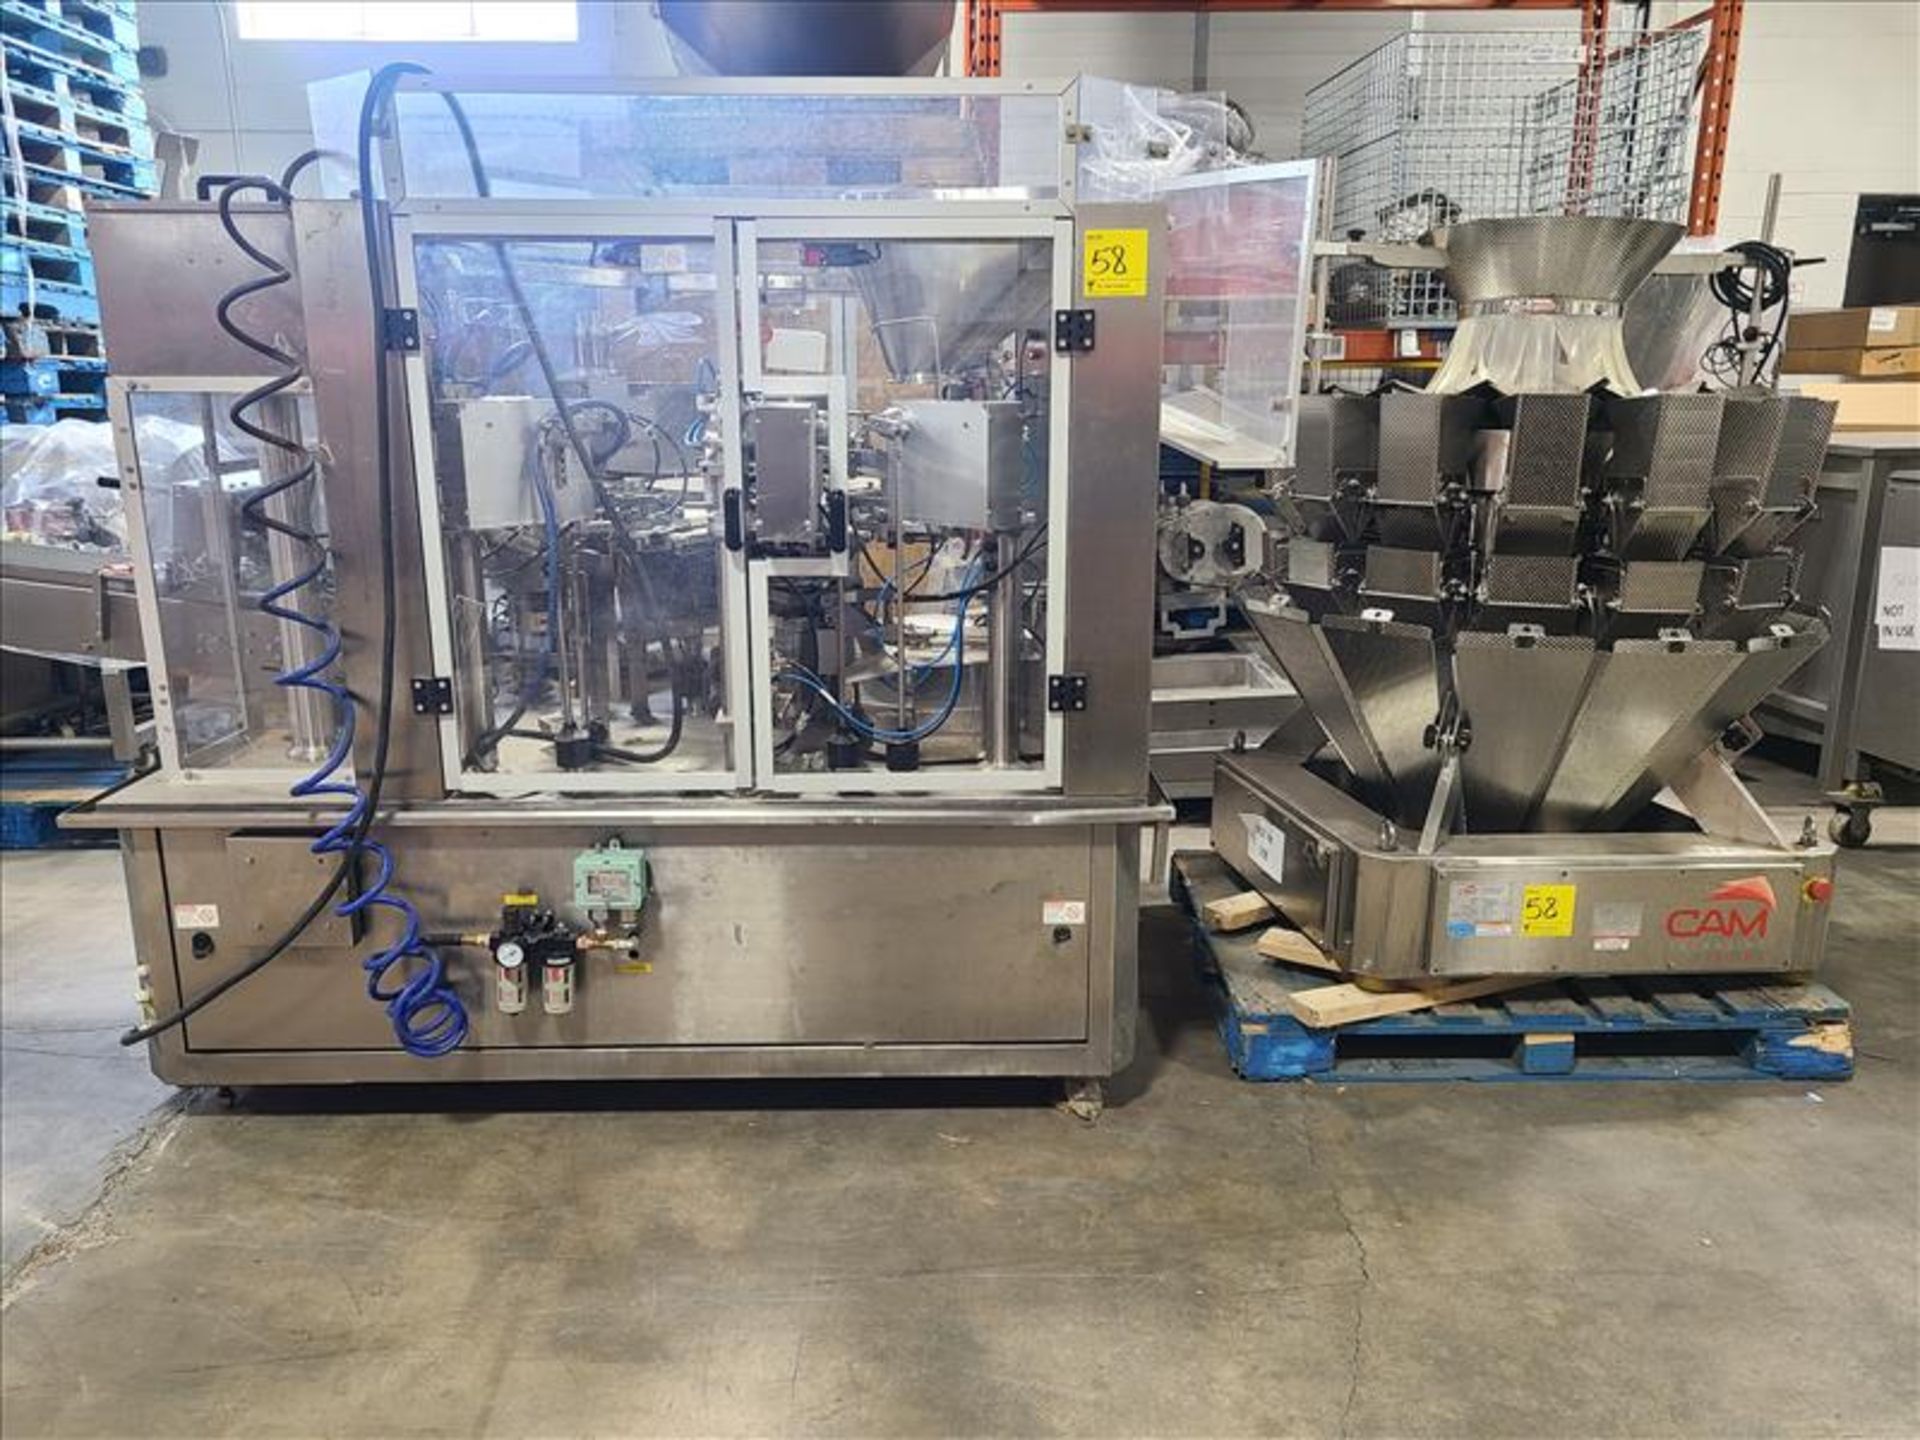 CAM Packaging Systems Standup Bagger Filling System, mod. 8-200A, ser. no. 1708004PB, 220 volts, 3